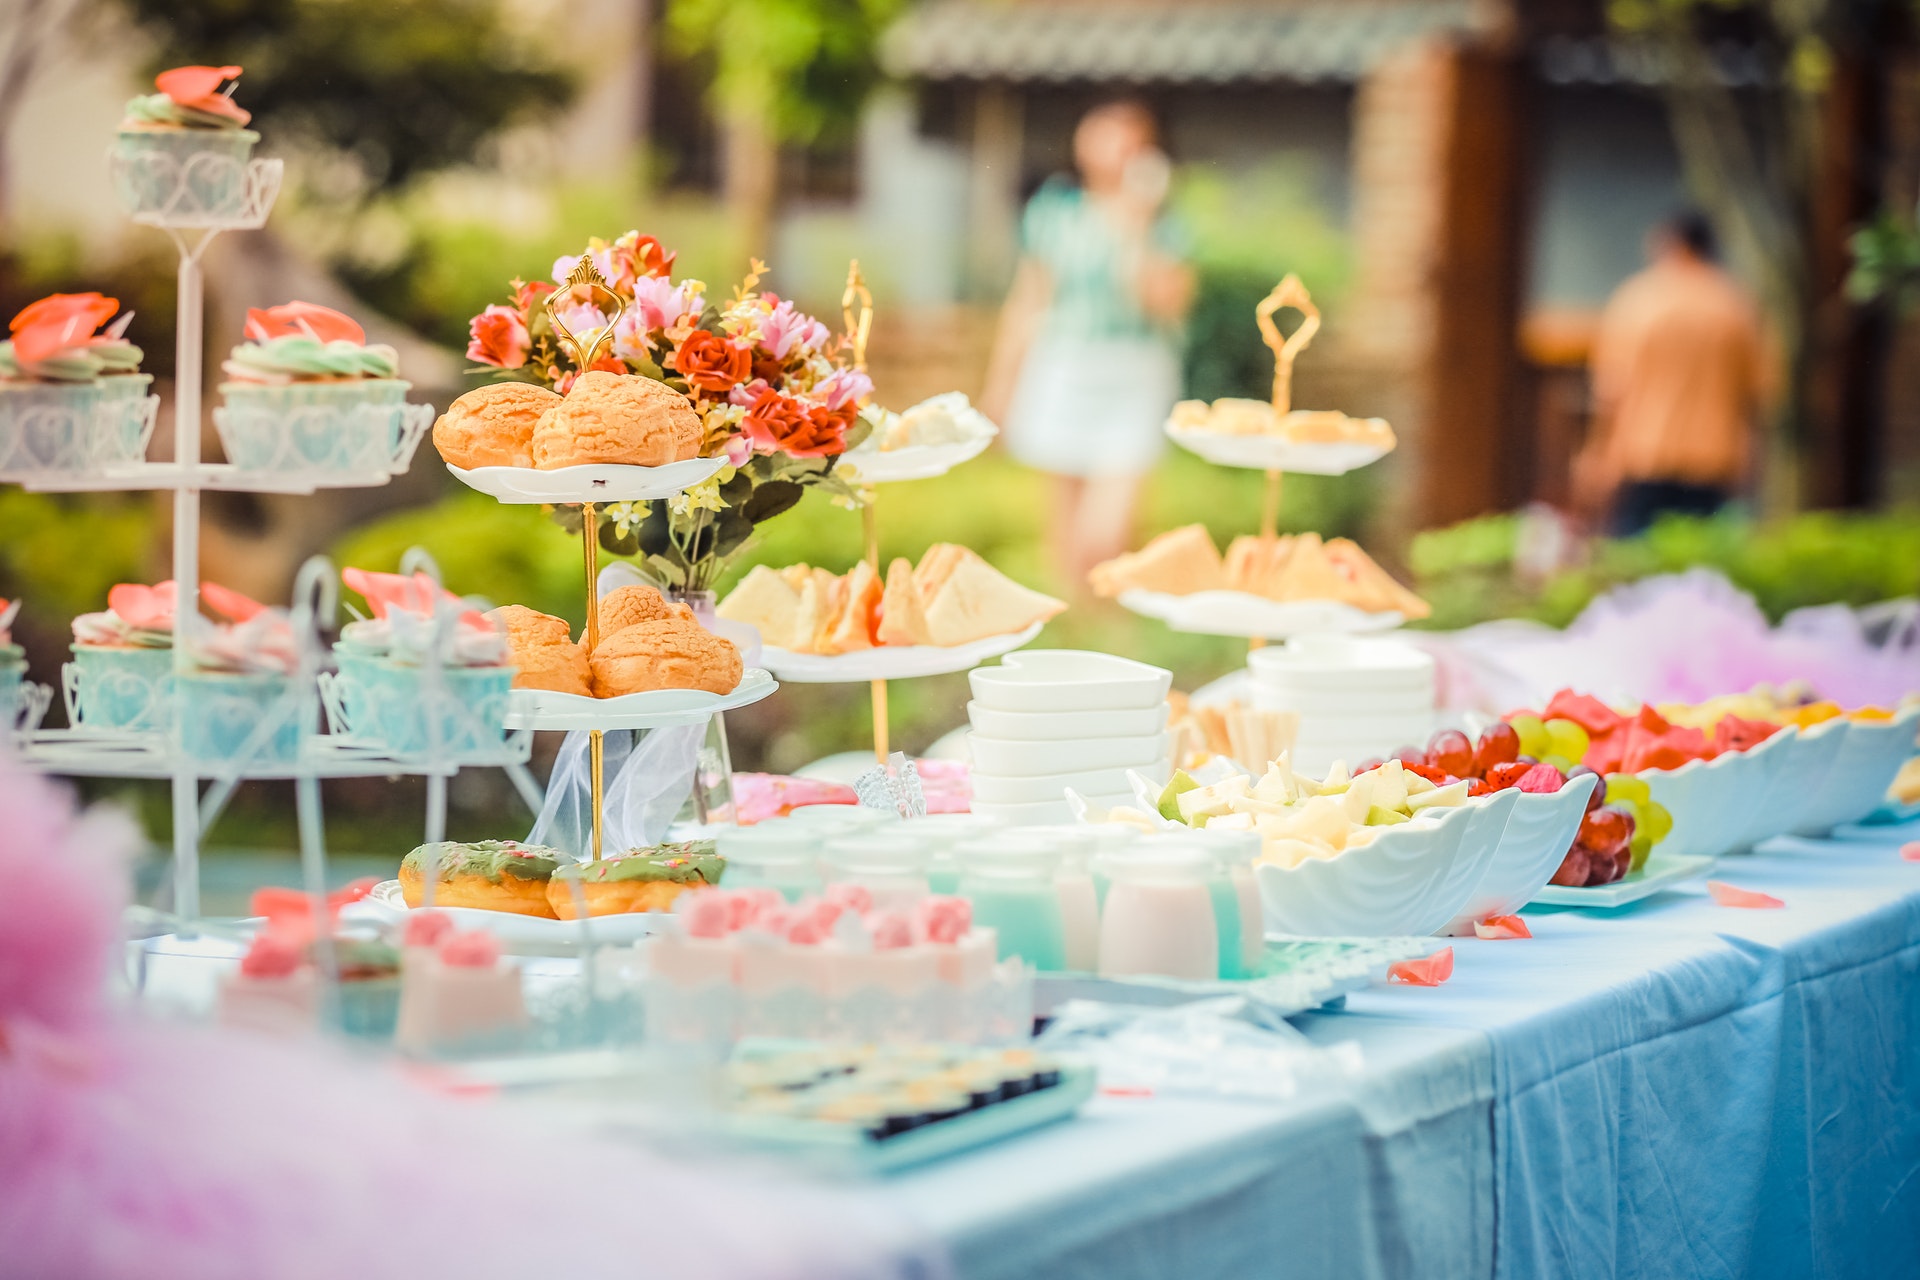 6 Tips for Choosing a Caterer to Use for a Fundraising Dinner